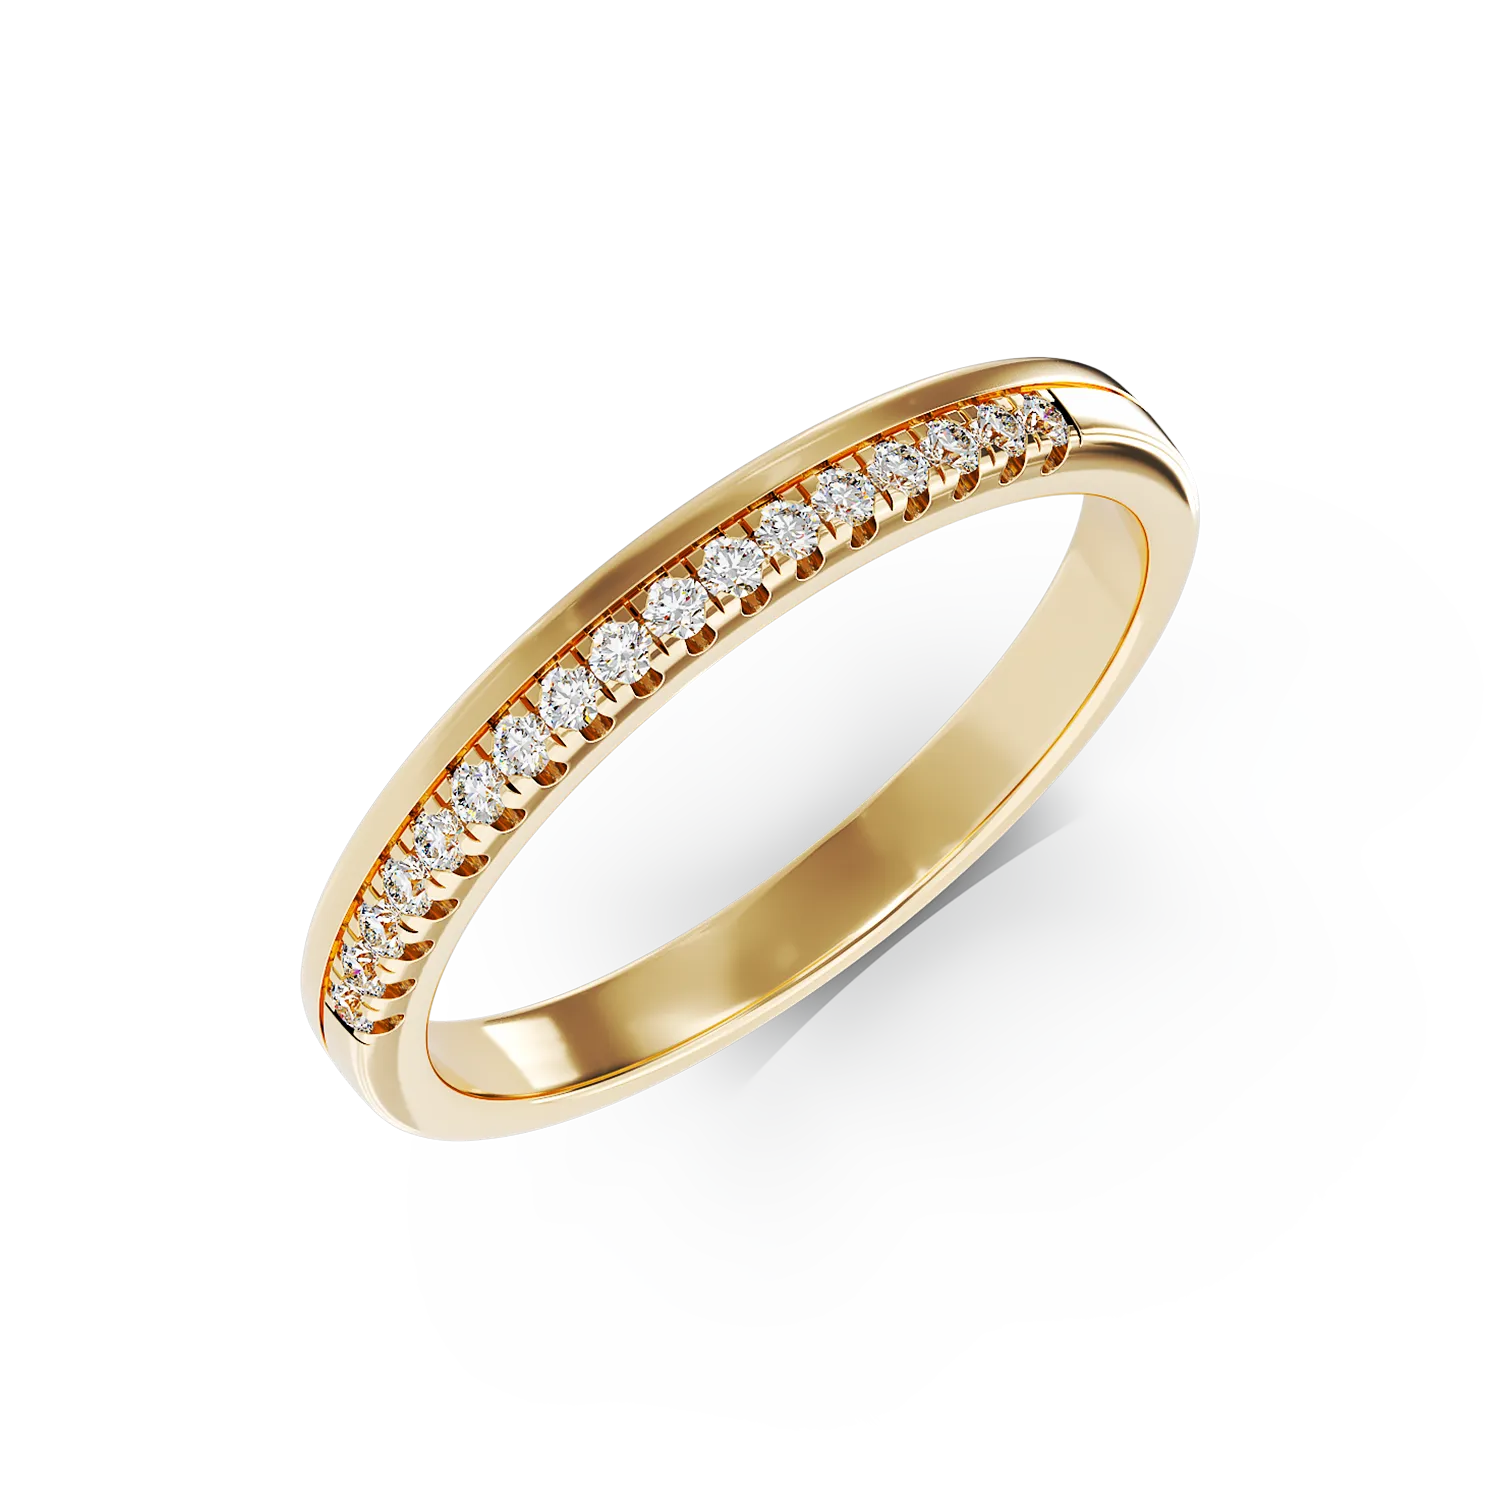 14K yellow gold ring with 0.11ct diamonds